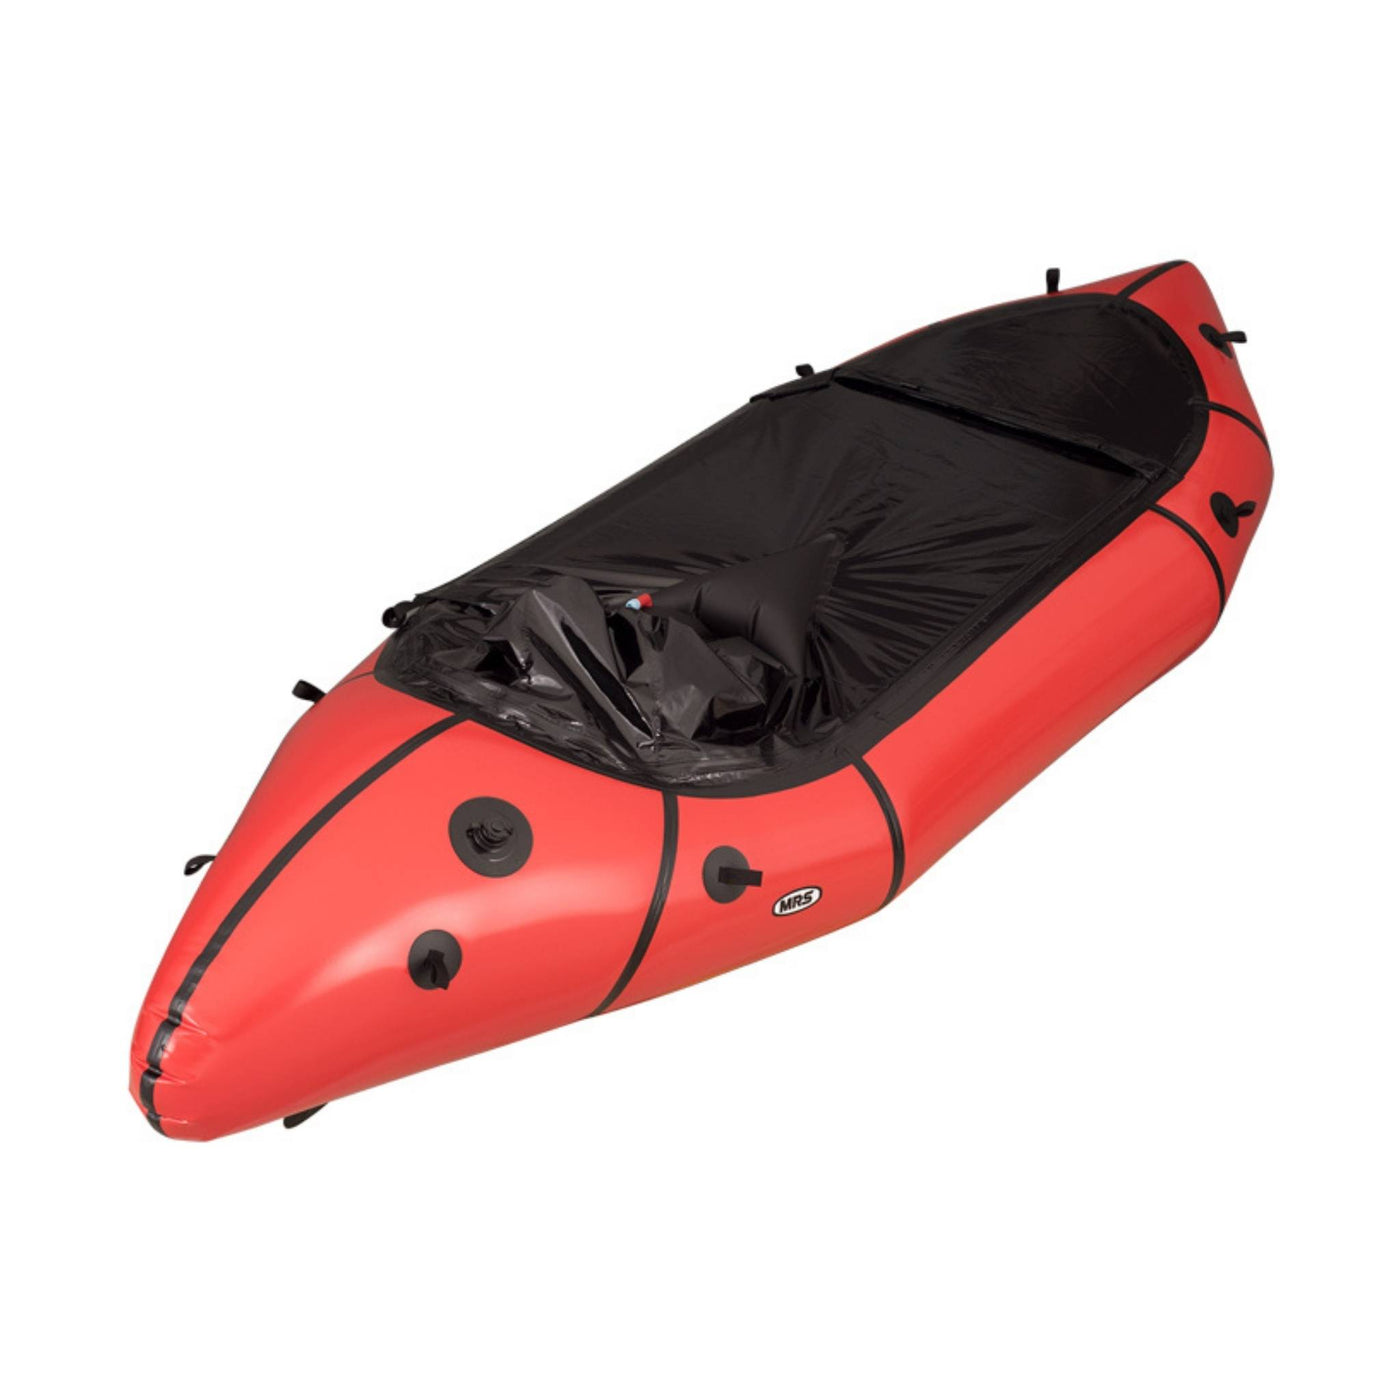 Micro Rafting Systems Microraft Packraft Small | Packrafts NZ | Further Faster Christchurch NZ #red